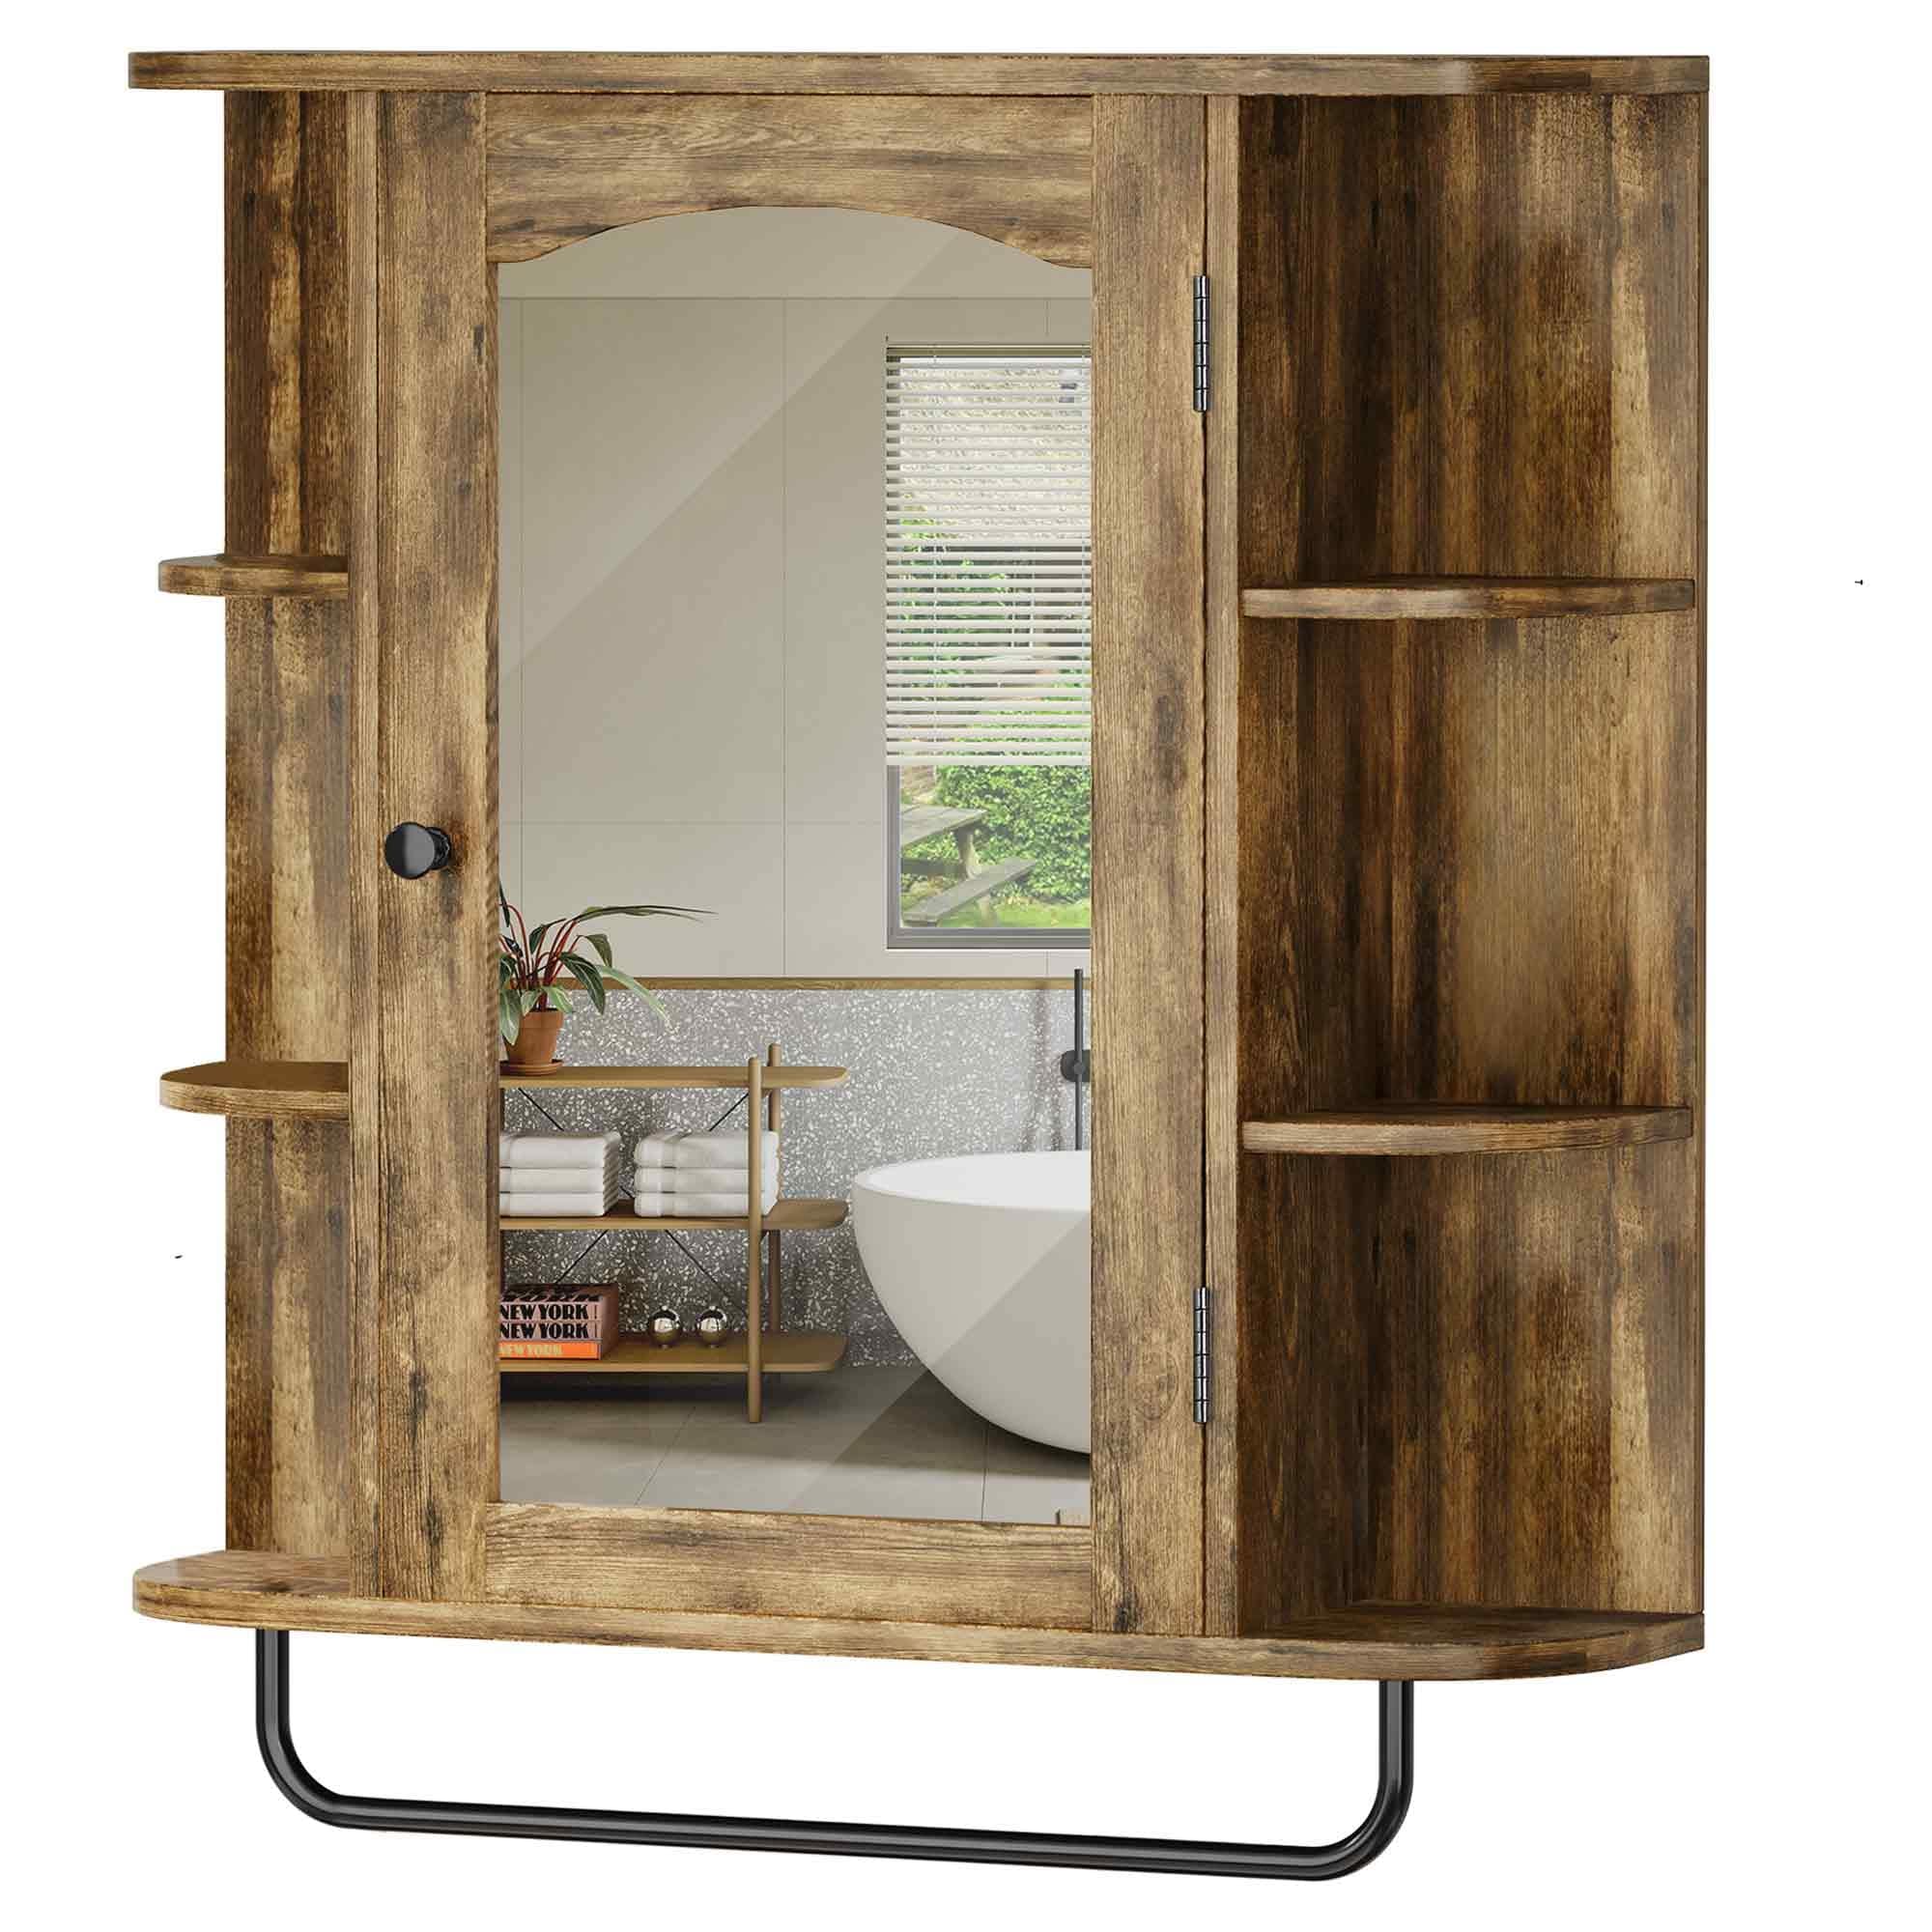 https://ak1.ostkcdn.com/images/products/is/images/direct/56df4b5ac5a6c2a3b5b486f85bf68ea990d89977/Modern-Wall-Bathroom-Storage-Medicine-Cabinet-with-Adjustable-Shelves-and-Towel-Rack.jpg